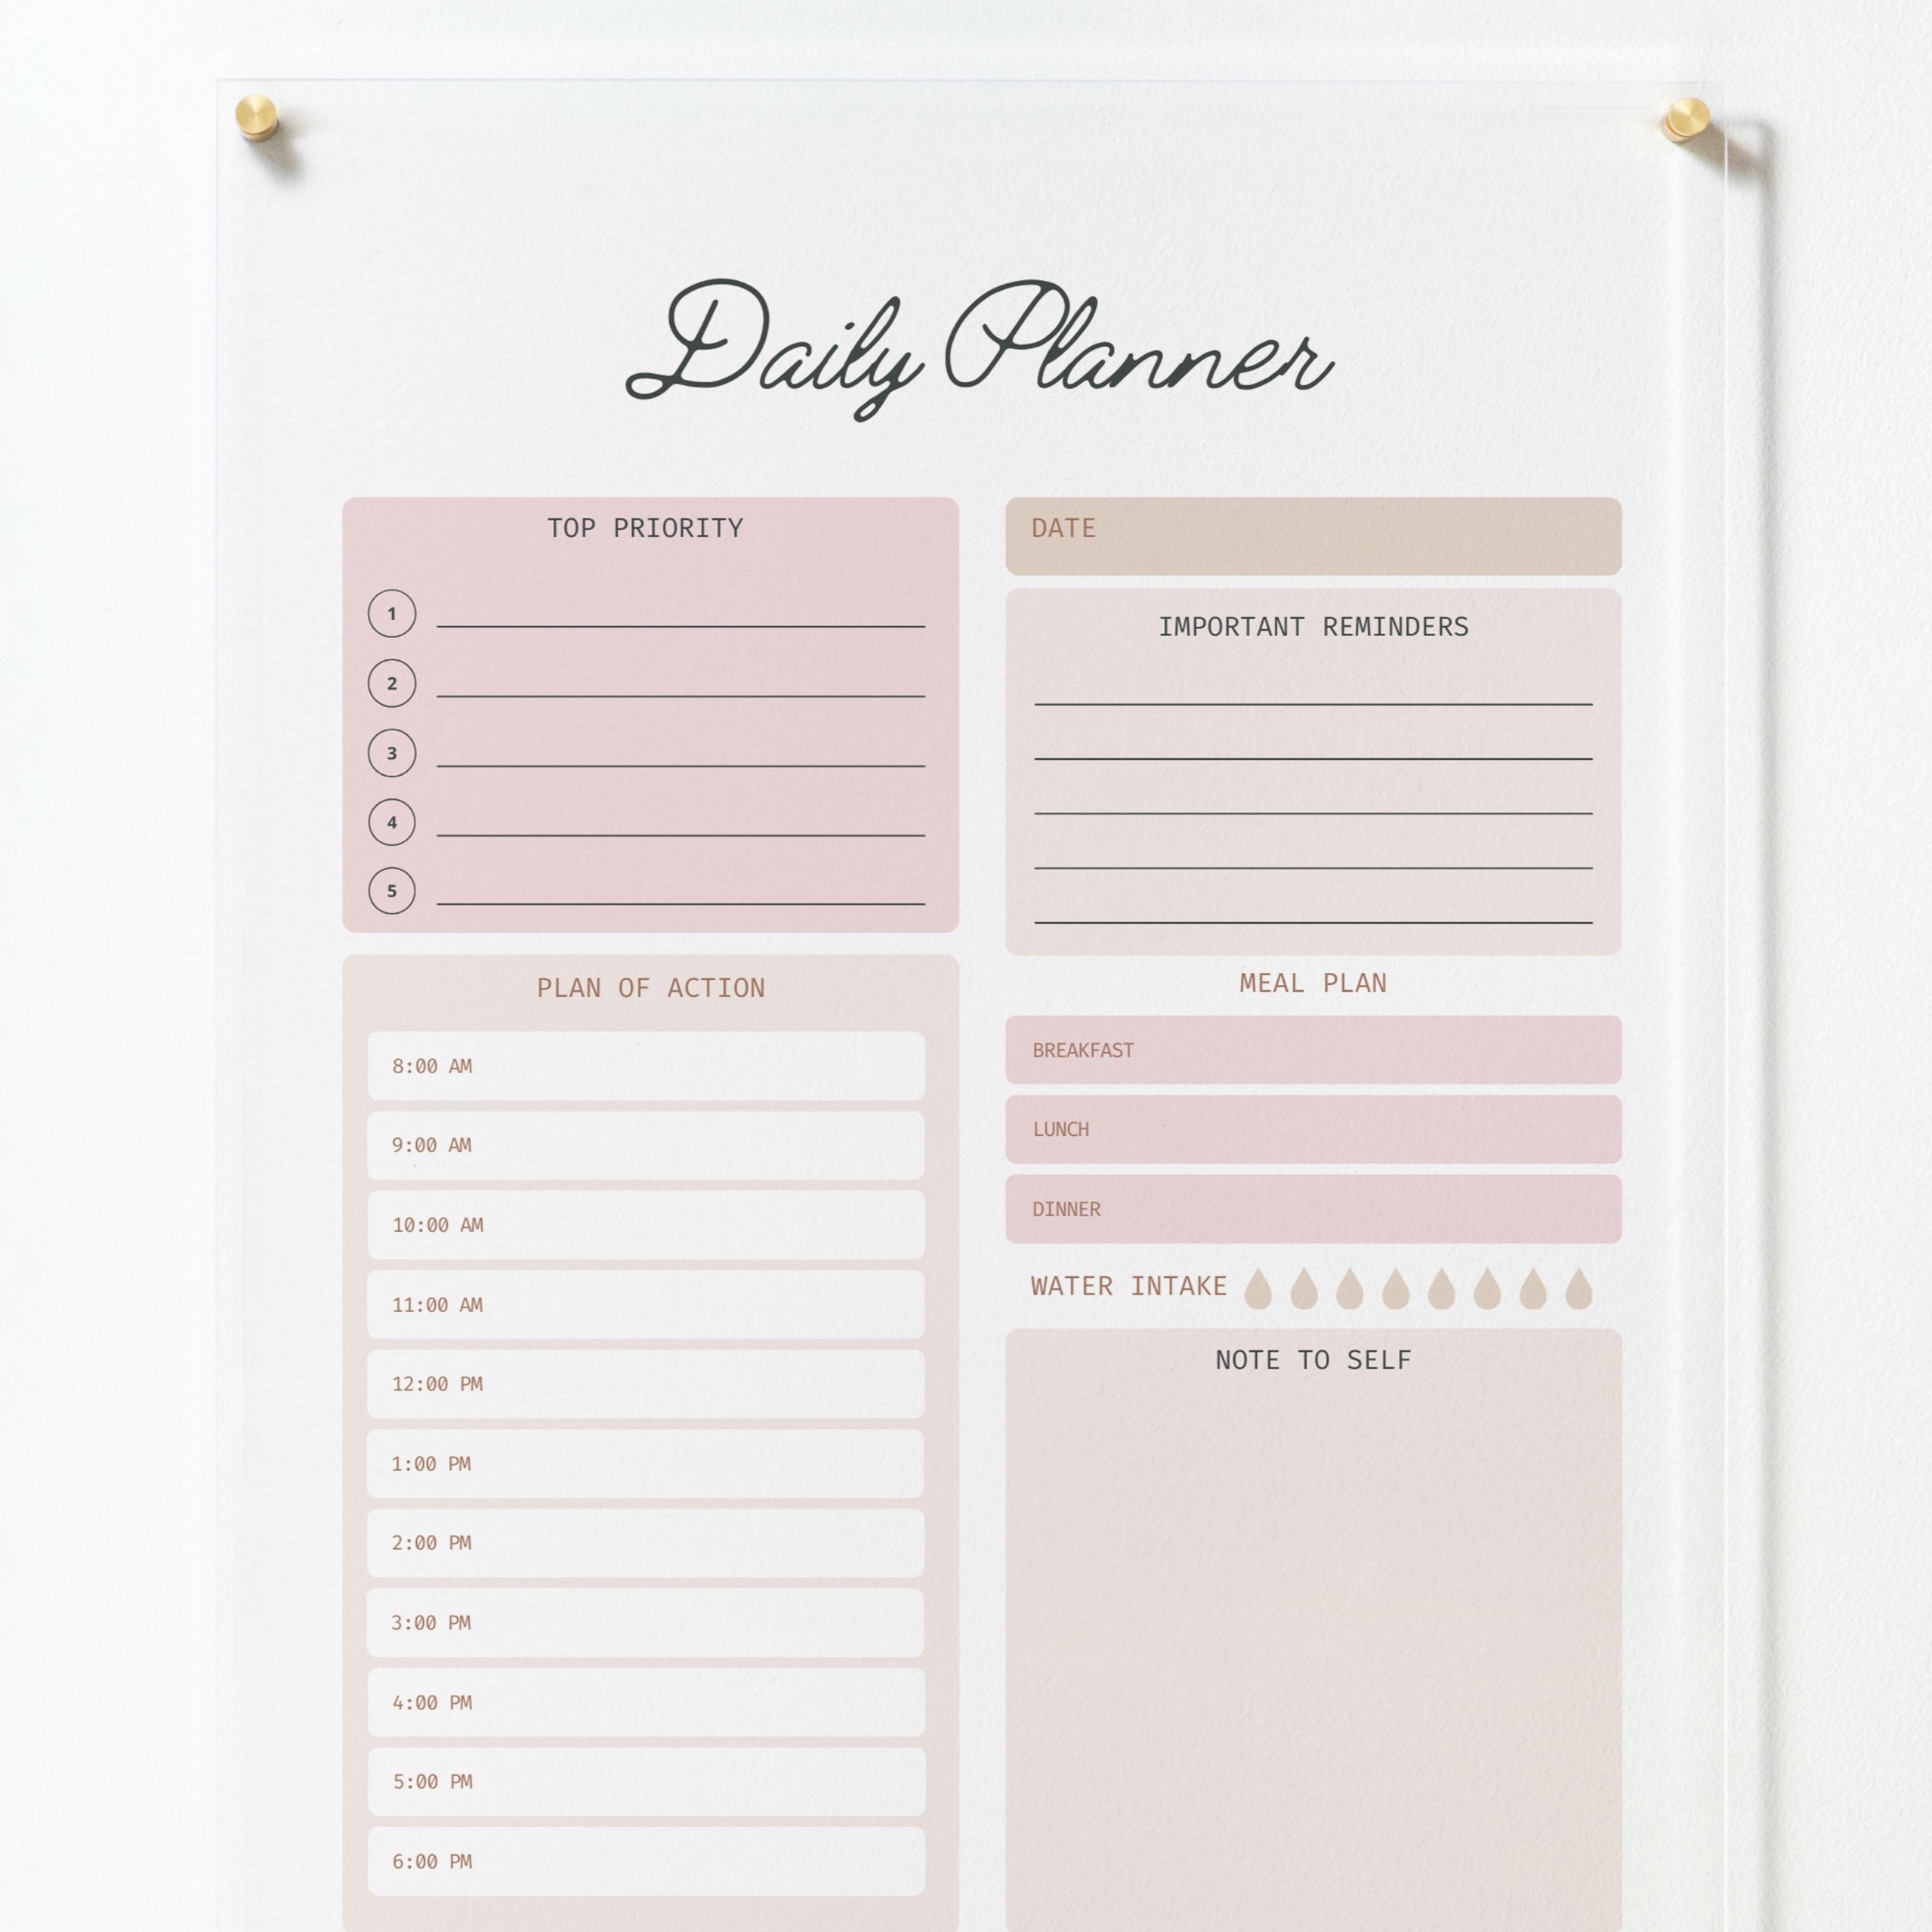 The full view of the same acrylic board, mounted on a white wall with gold pins. The board includes sections for top priority, date, important reminders, plan of action, meal plan, water intake, and note to self, all in a soft pink and beige color scheme, adding a touch of elegance to any space.